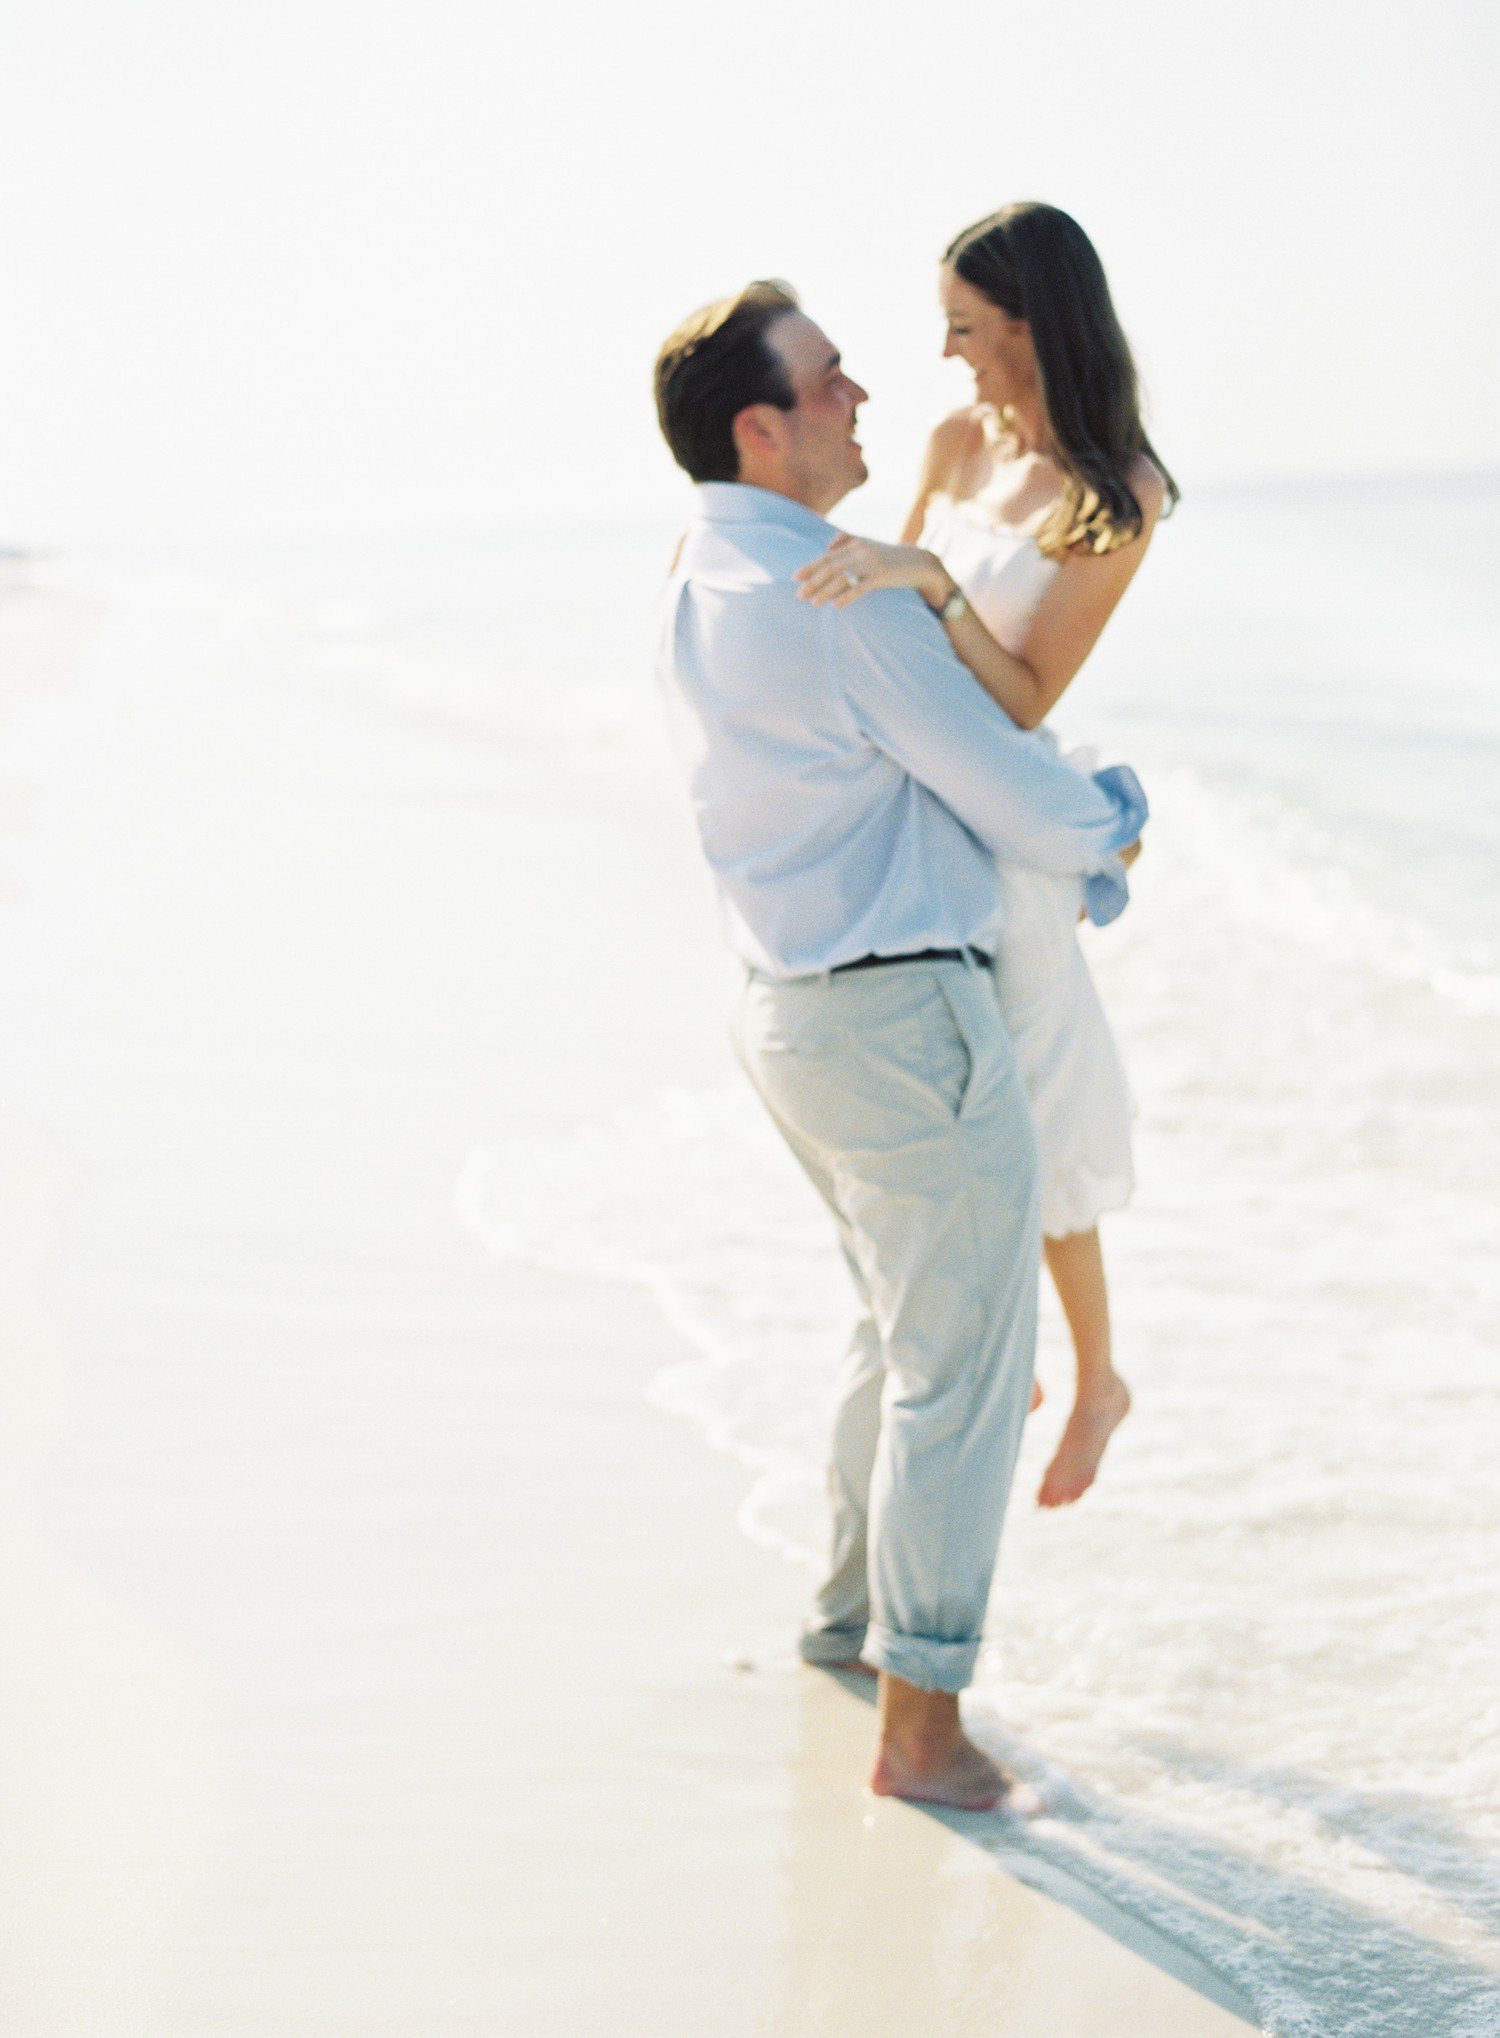 Guy picking up girl during engagement photos on the beach. 